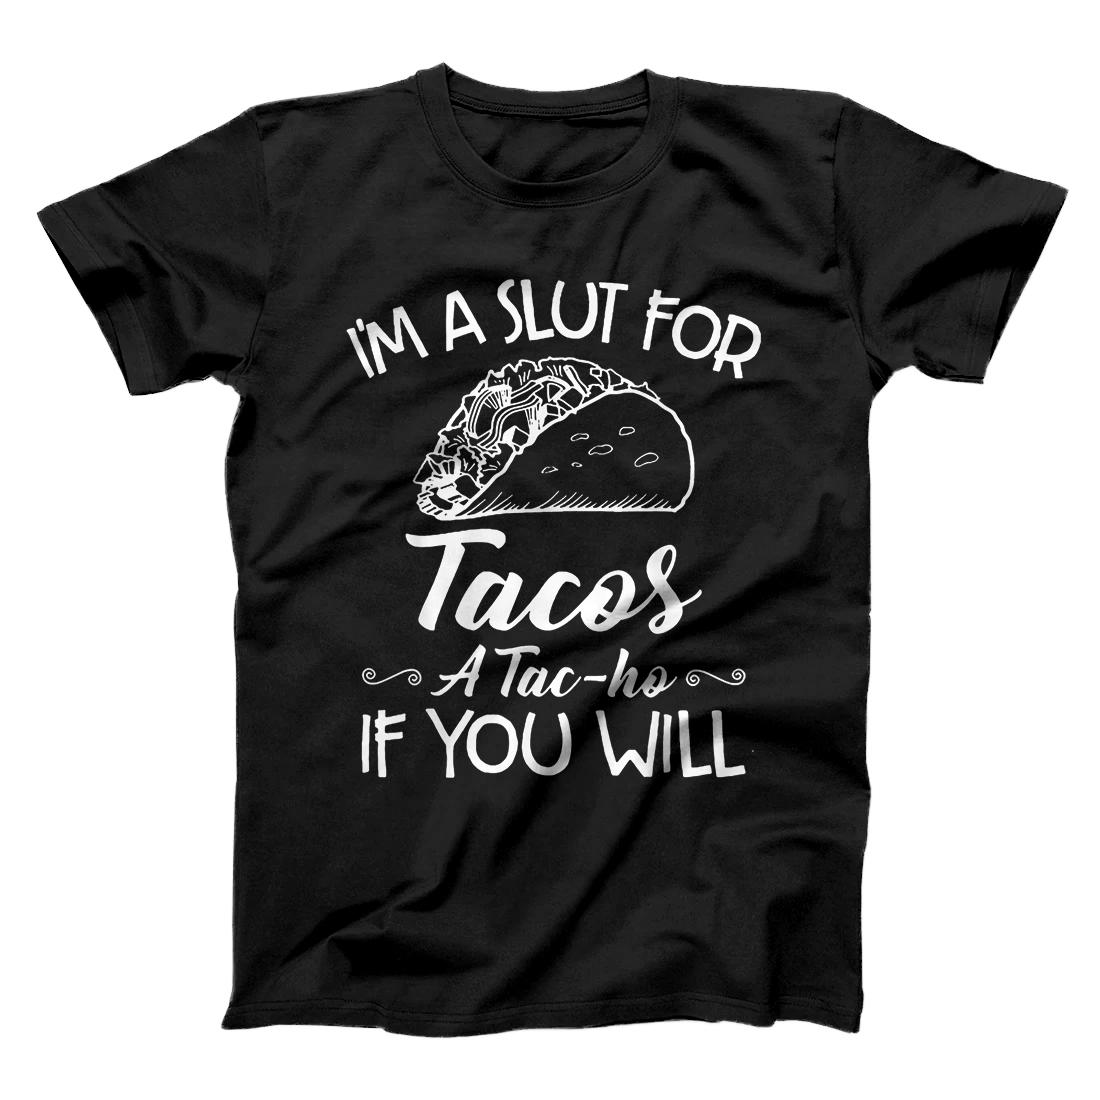 Personalized I'm A Slut For Tacos A Tac-ho If You Will T-Shirt